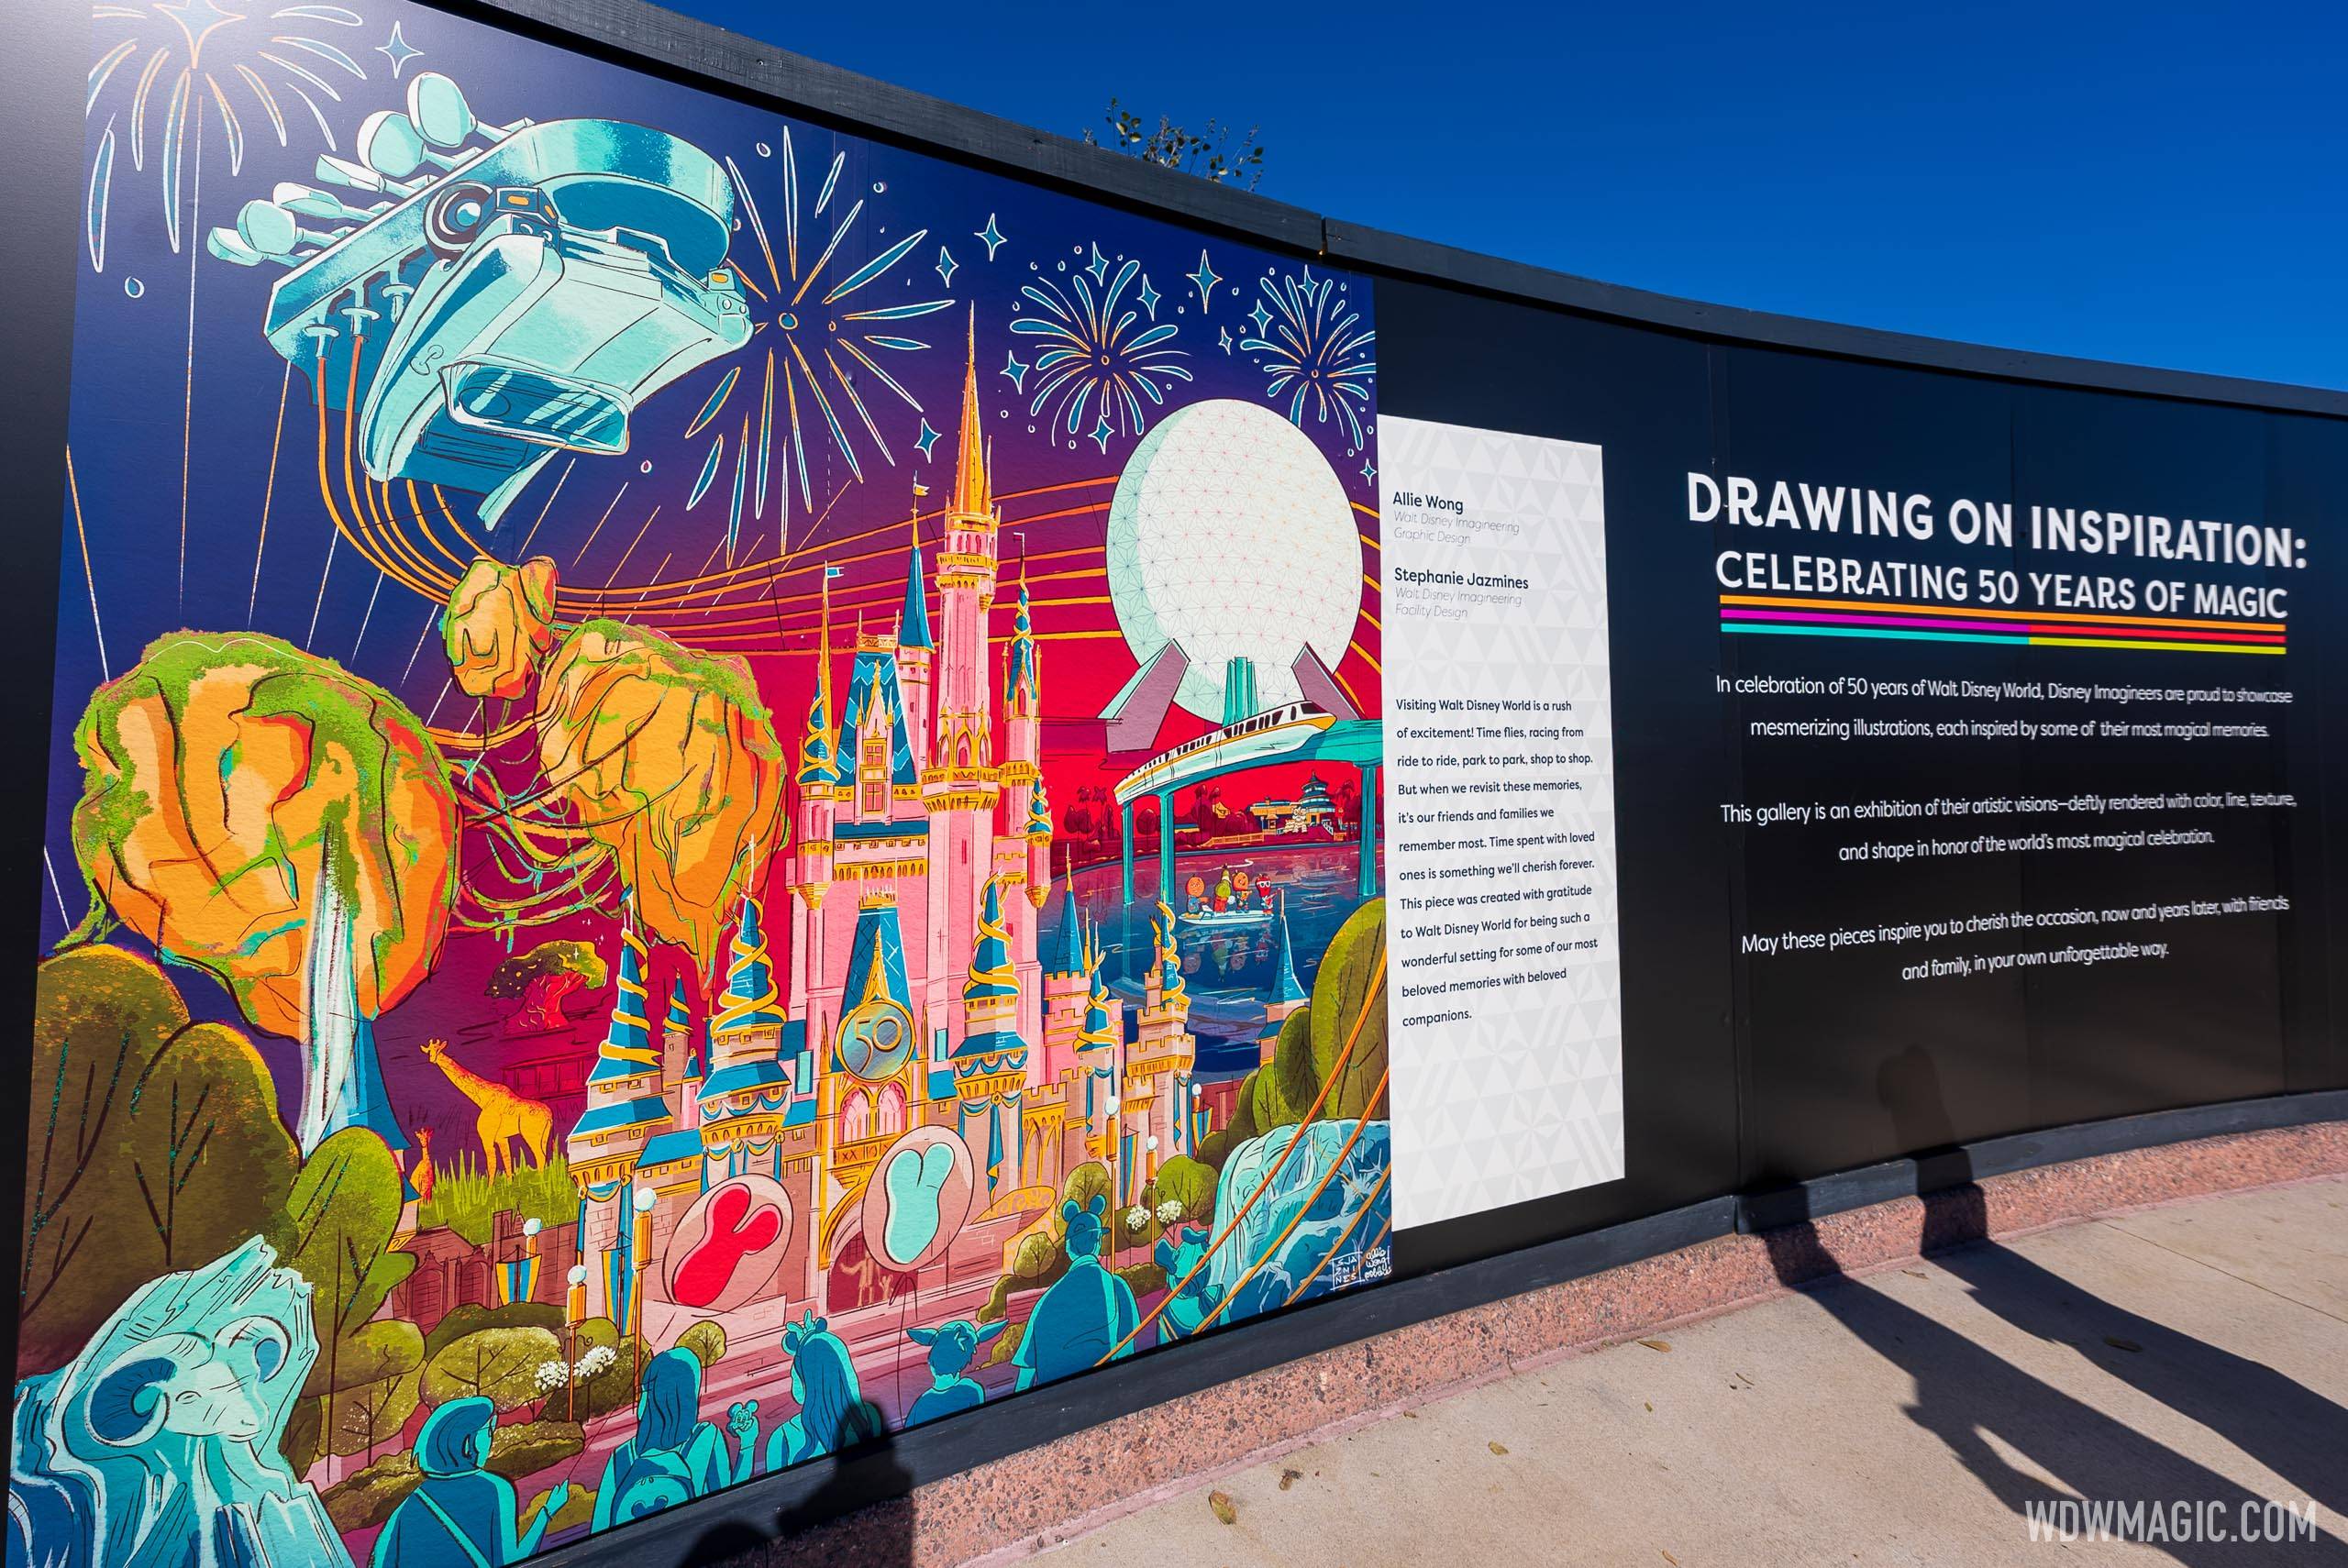 Opening day at the 2022 Epcot International Festival of the Arts